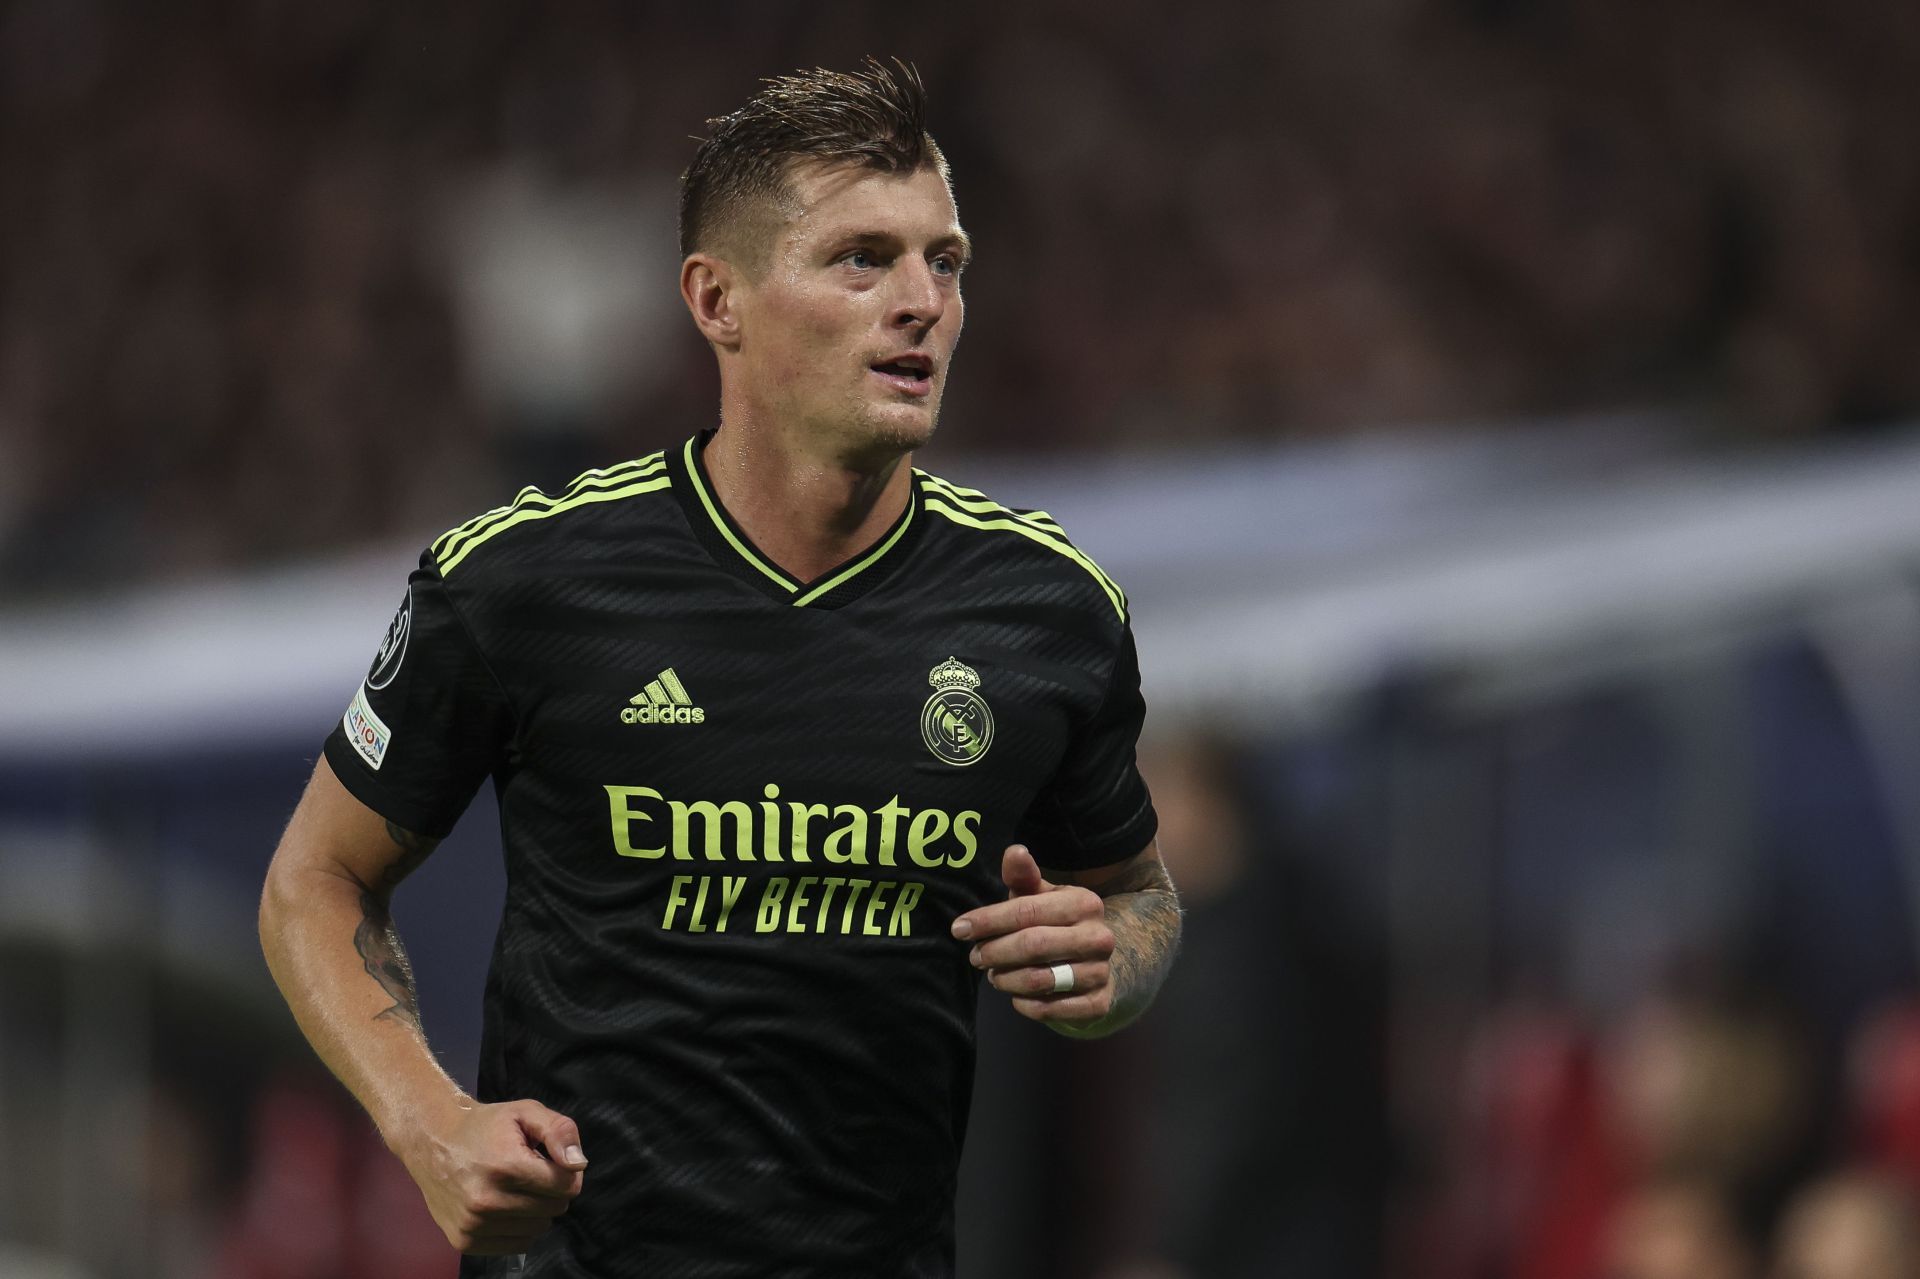 Toni Kroos is yet to make a decision on his future.